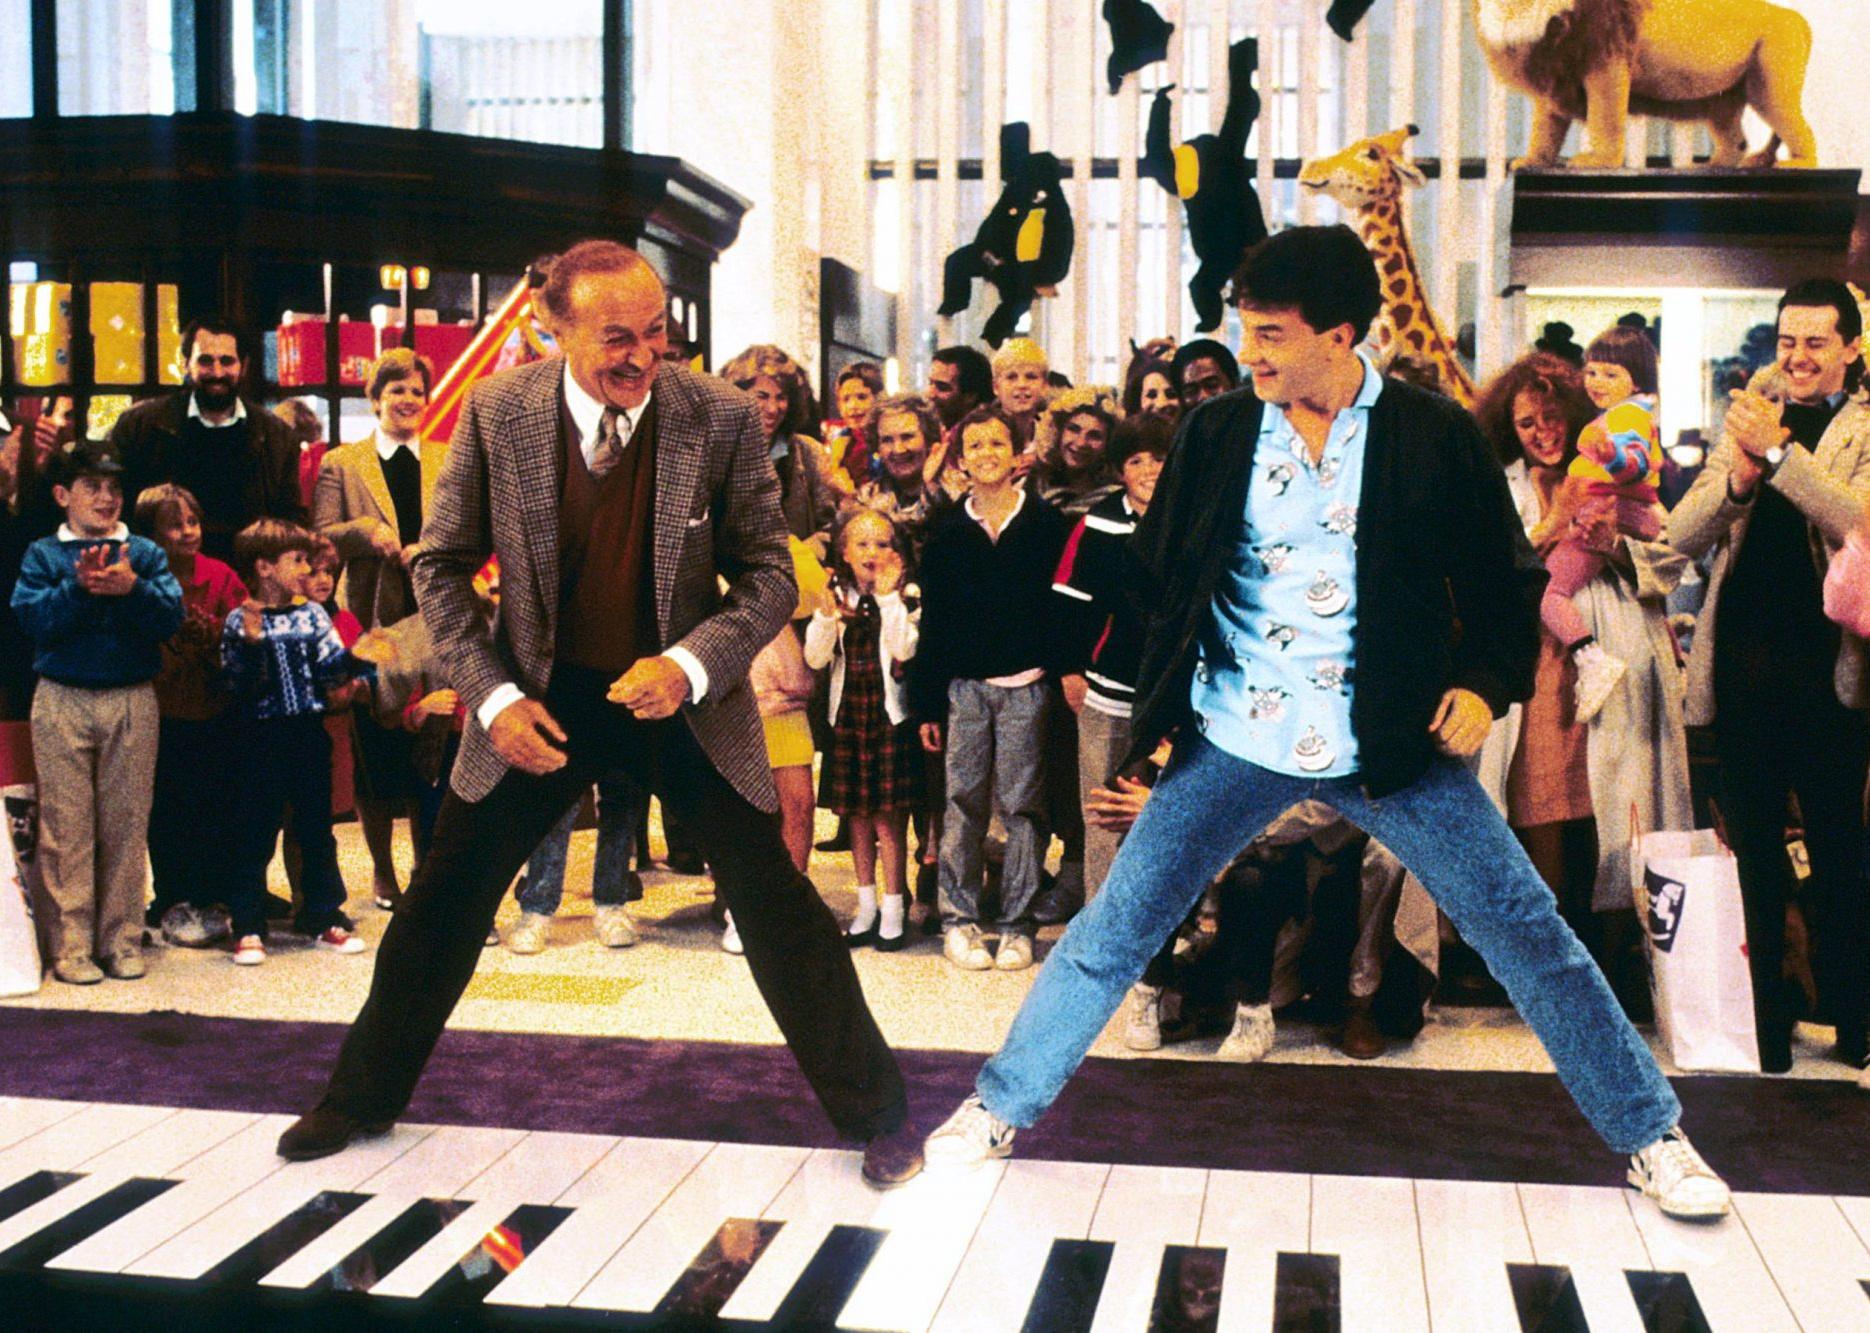 Tom Hanks dances on a giant foot piano in in a toy store in the movie "Big."